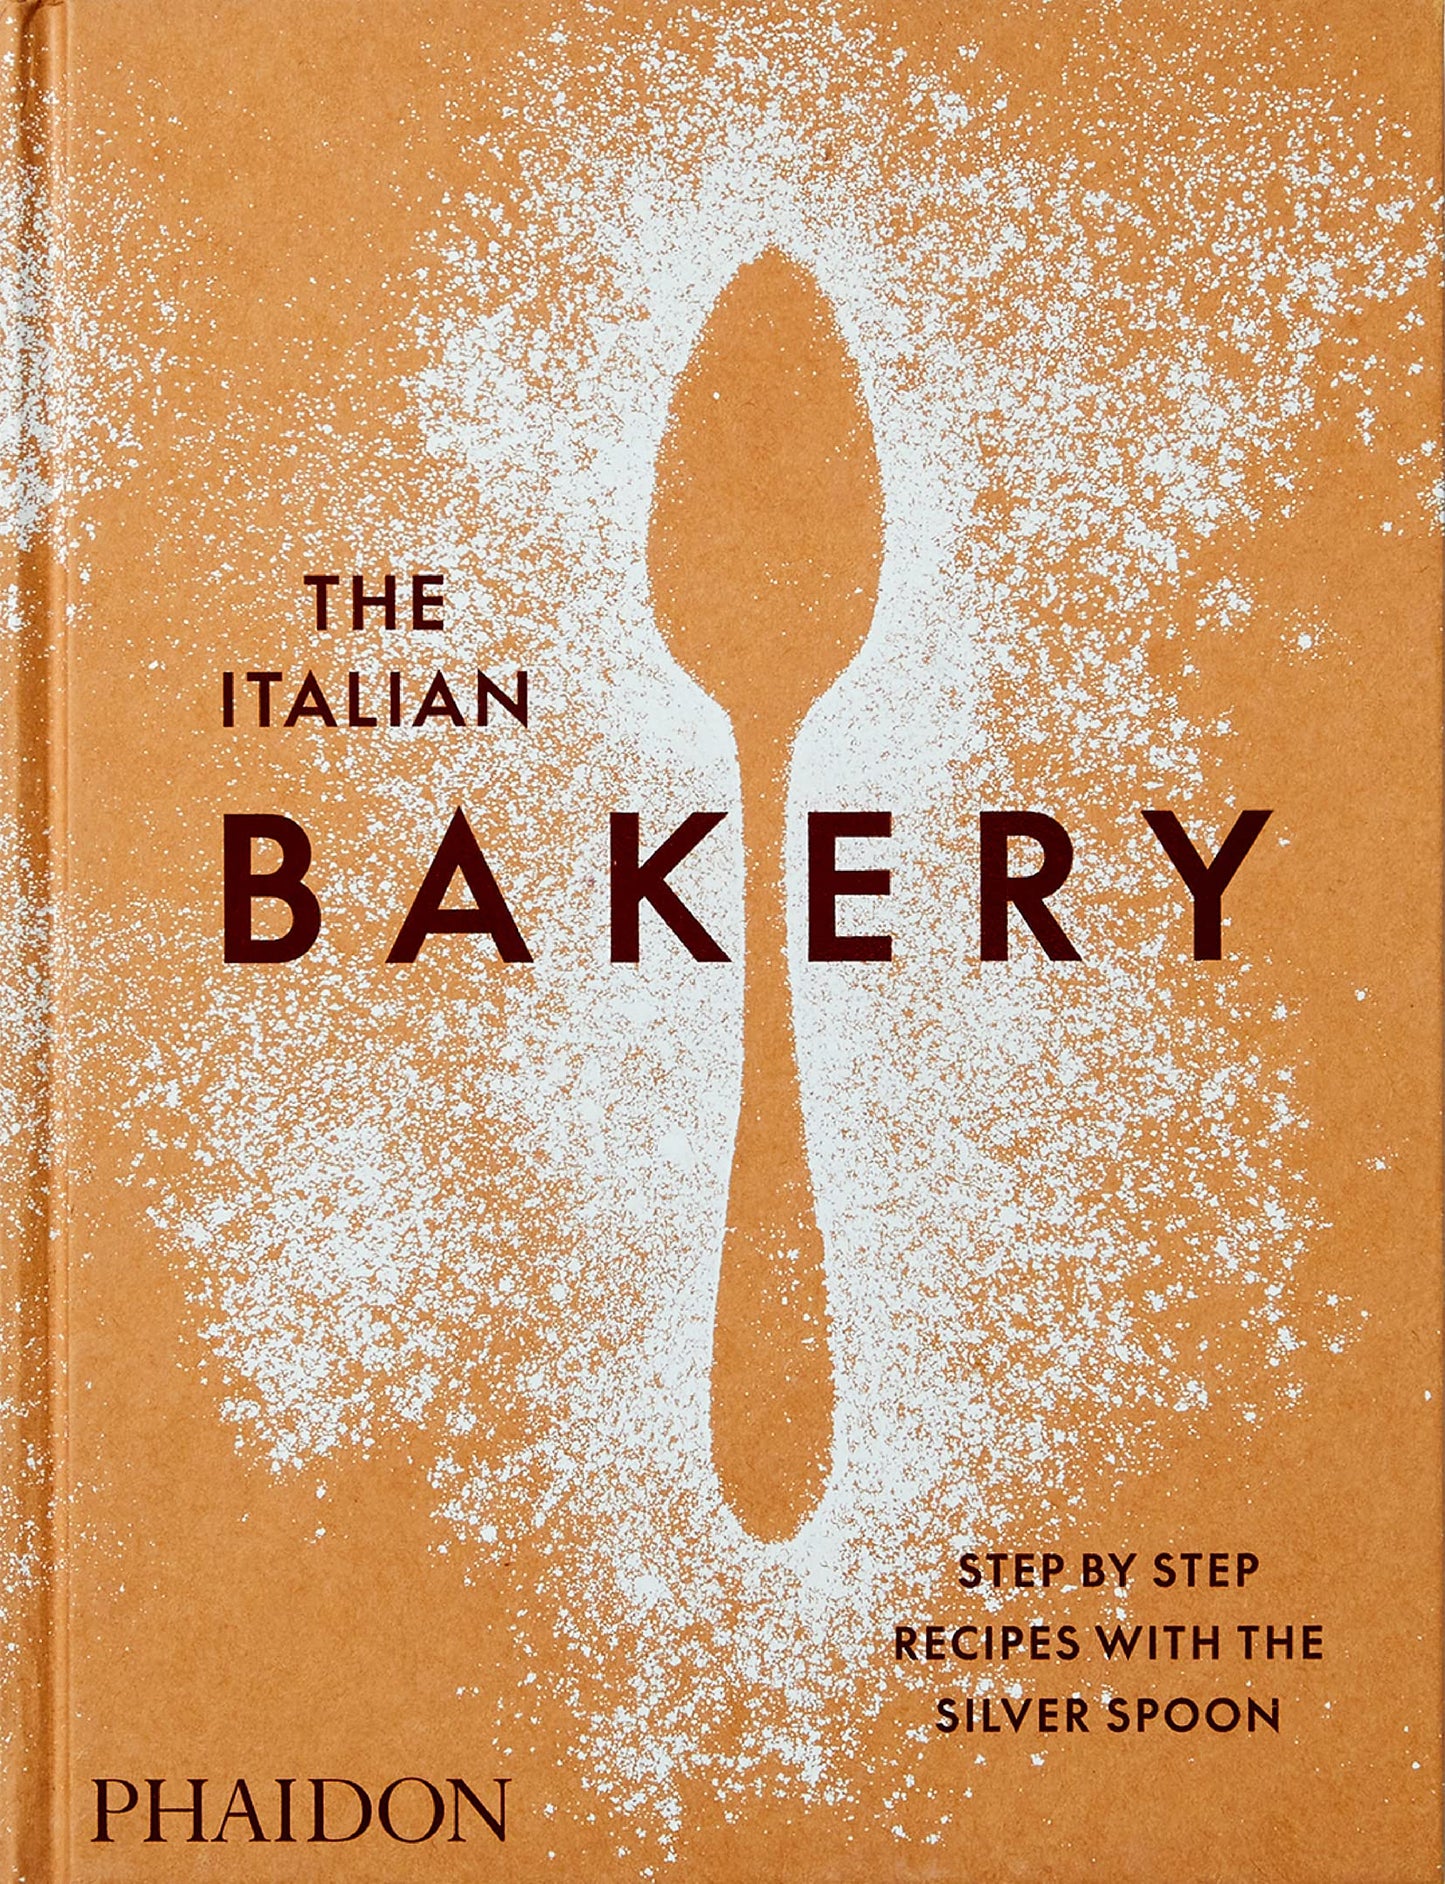 The Italian Bakery step by step recipes with the Silver Spoon  LIB-118